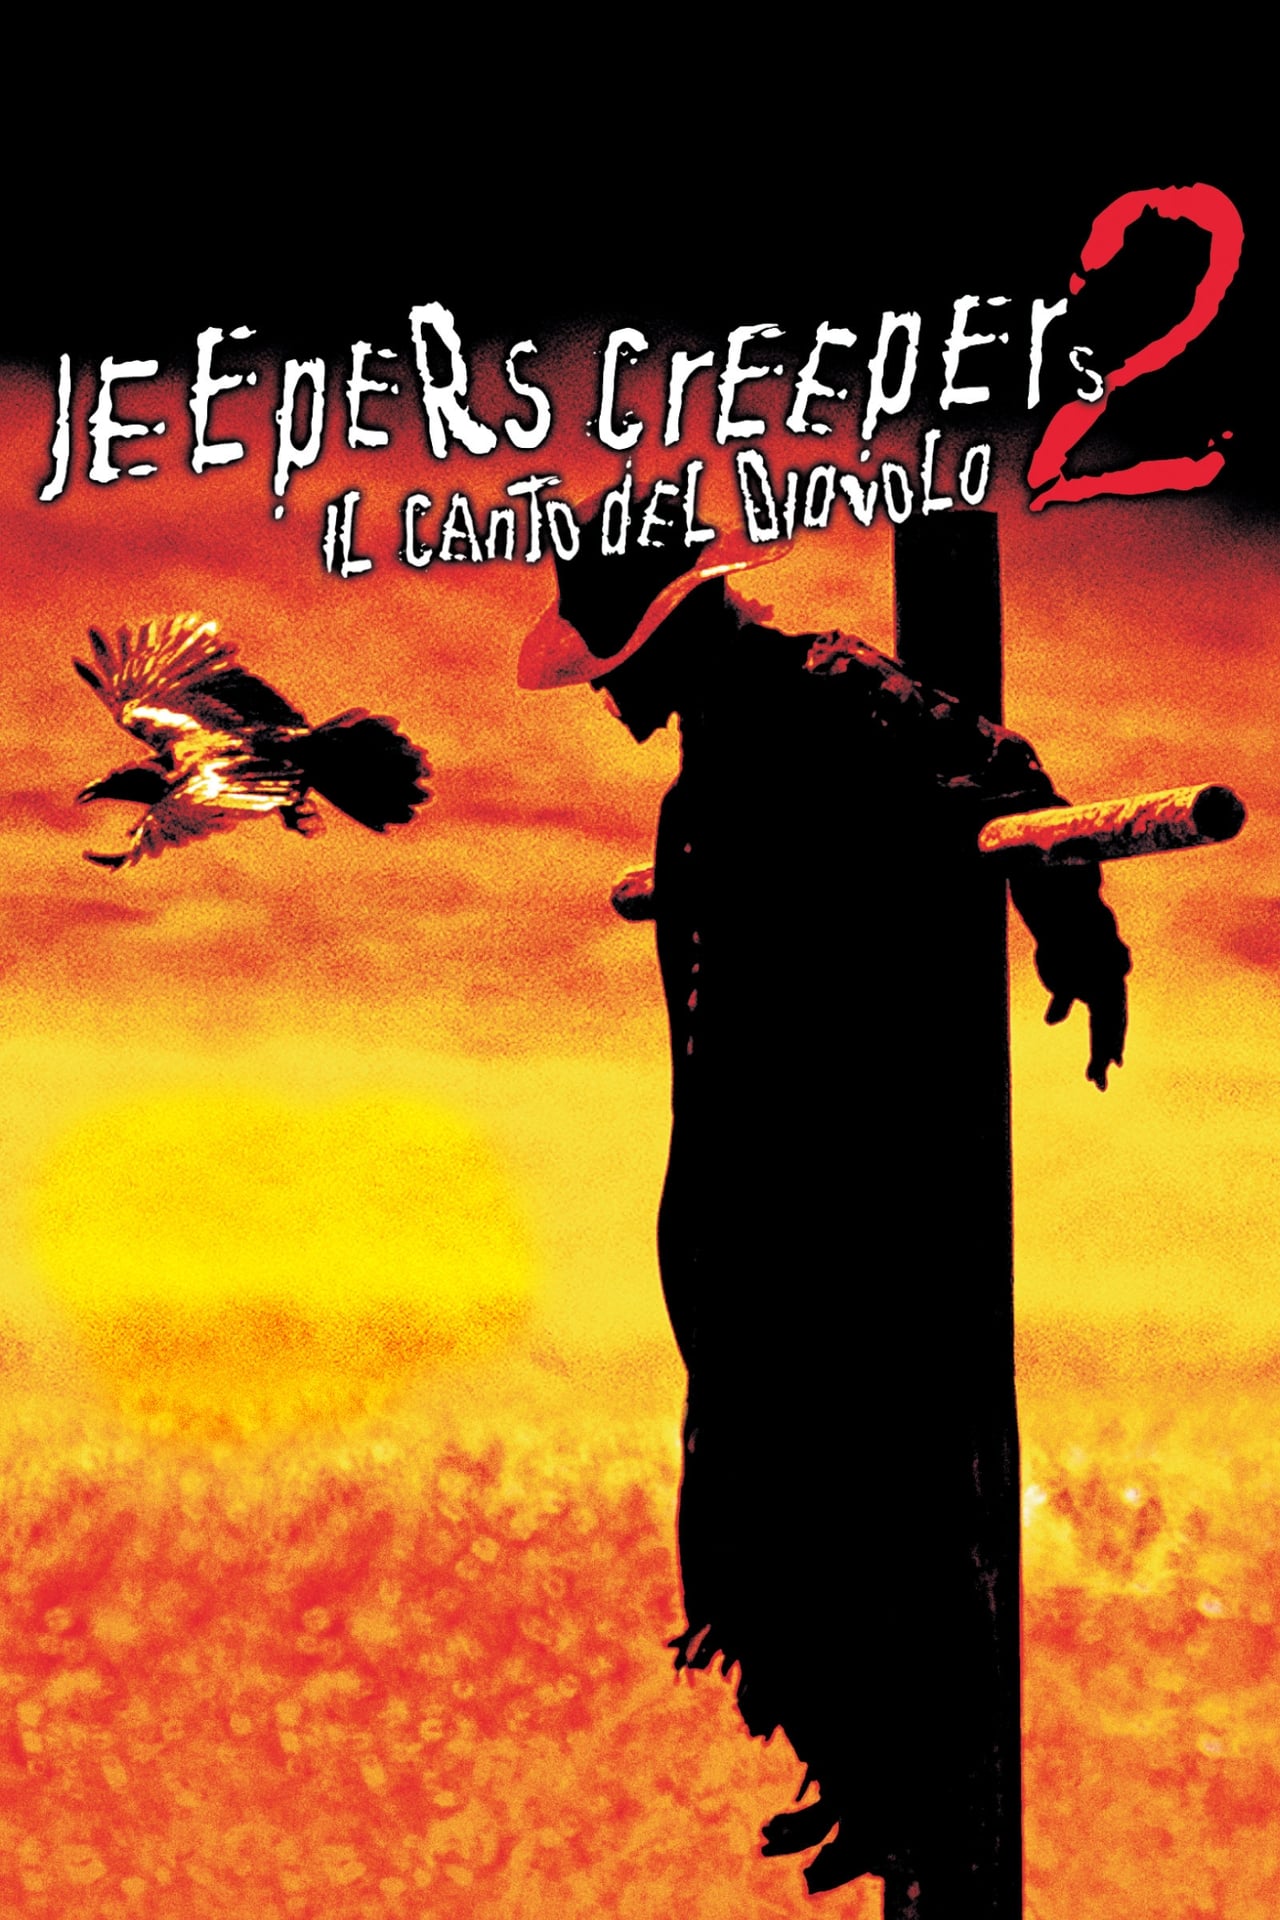 watch jeepers creepers movie online